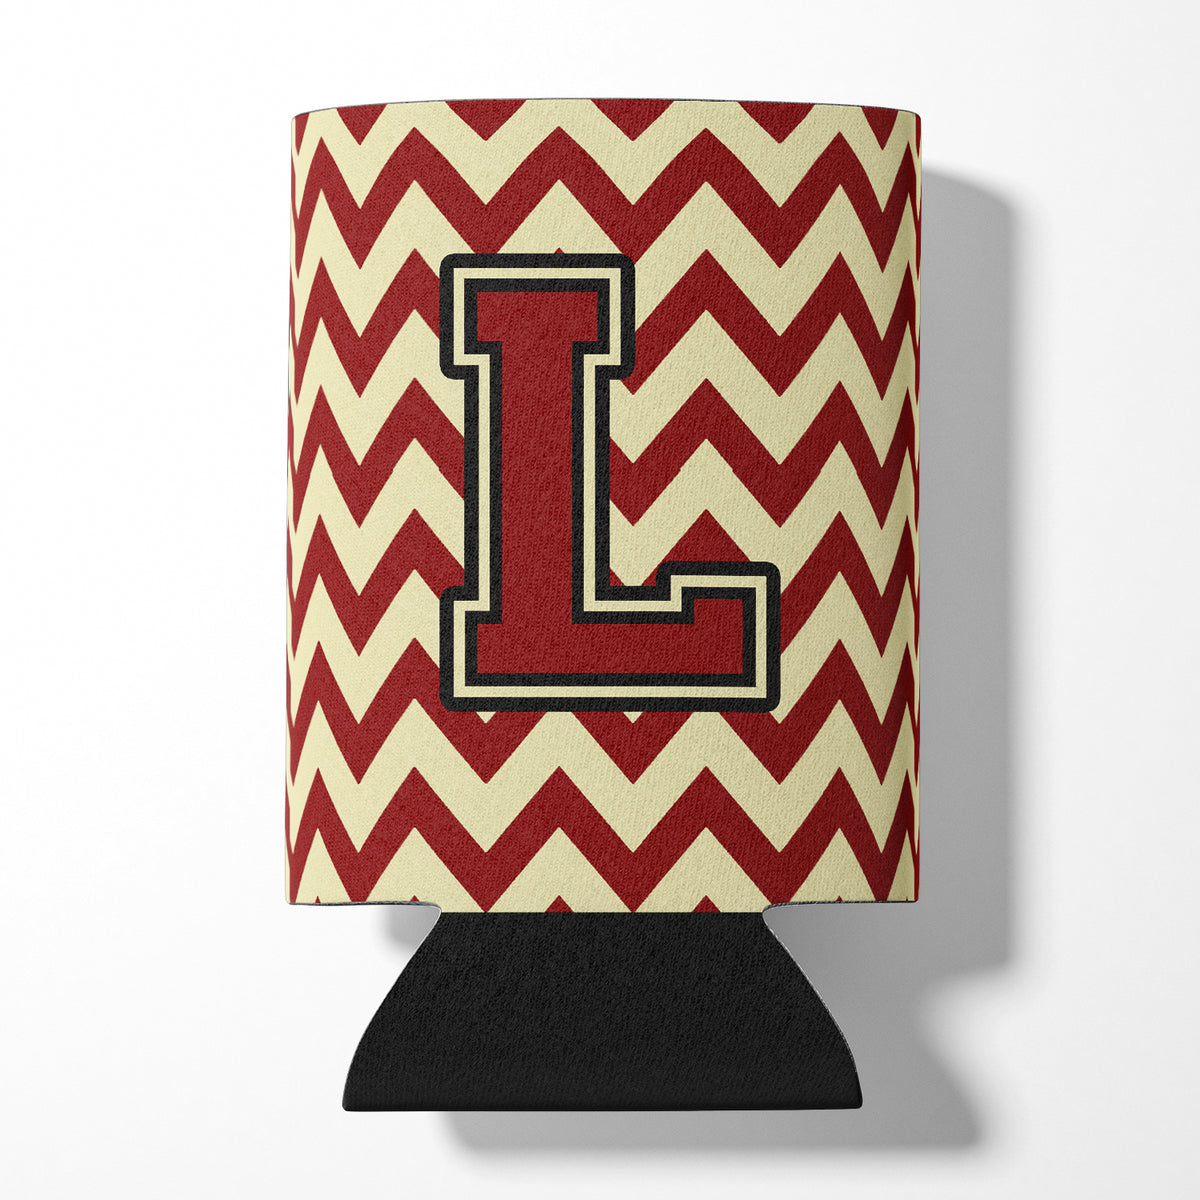 Letter L Chevron Maroon and Gold Can or Bottle Hugger CJ1061-LCC